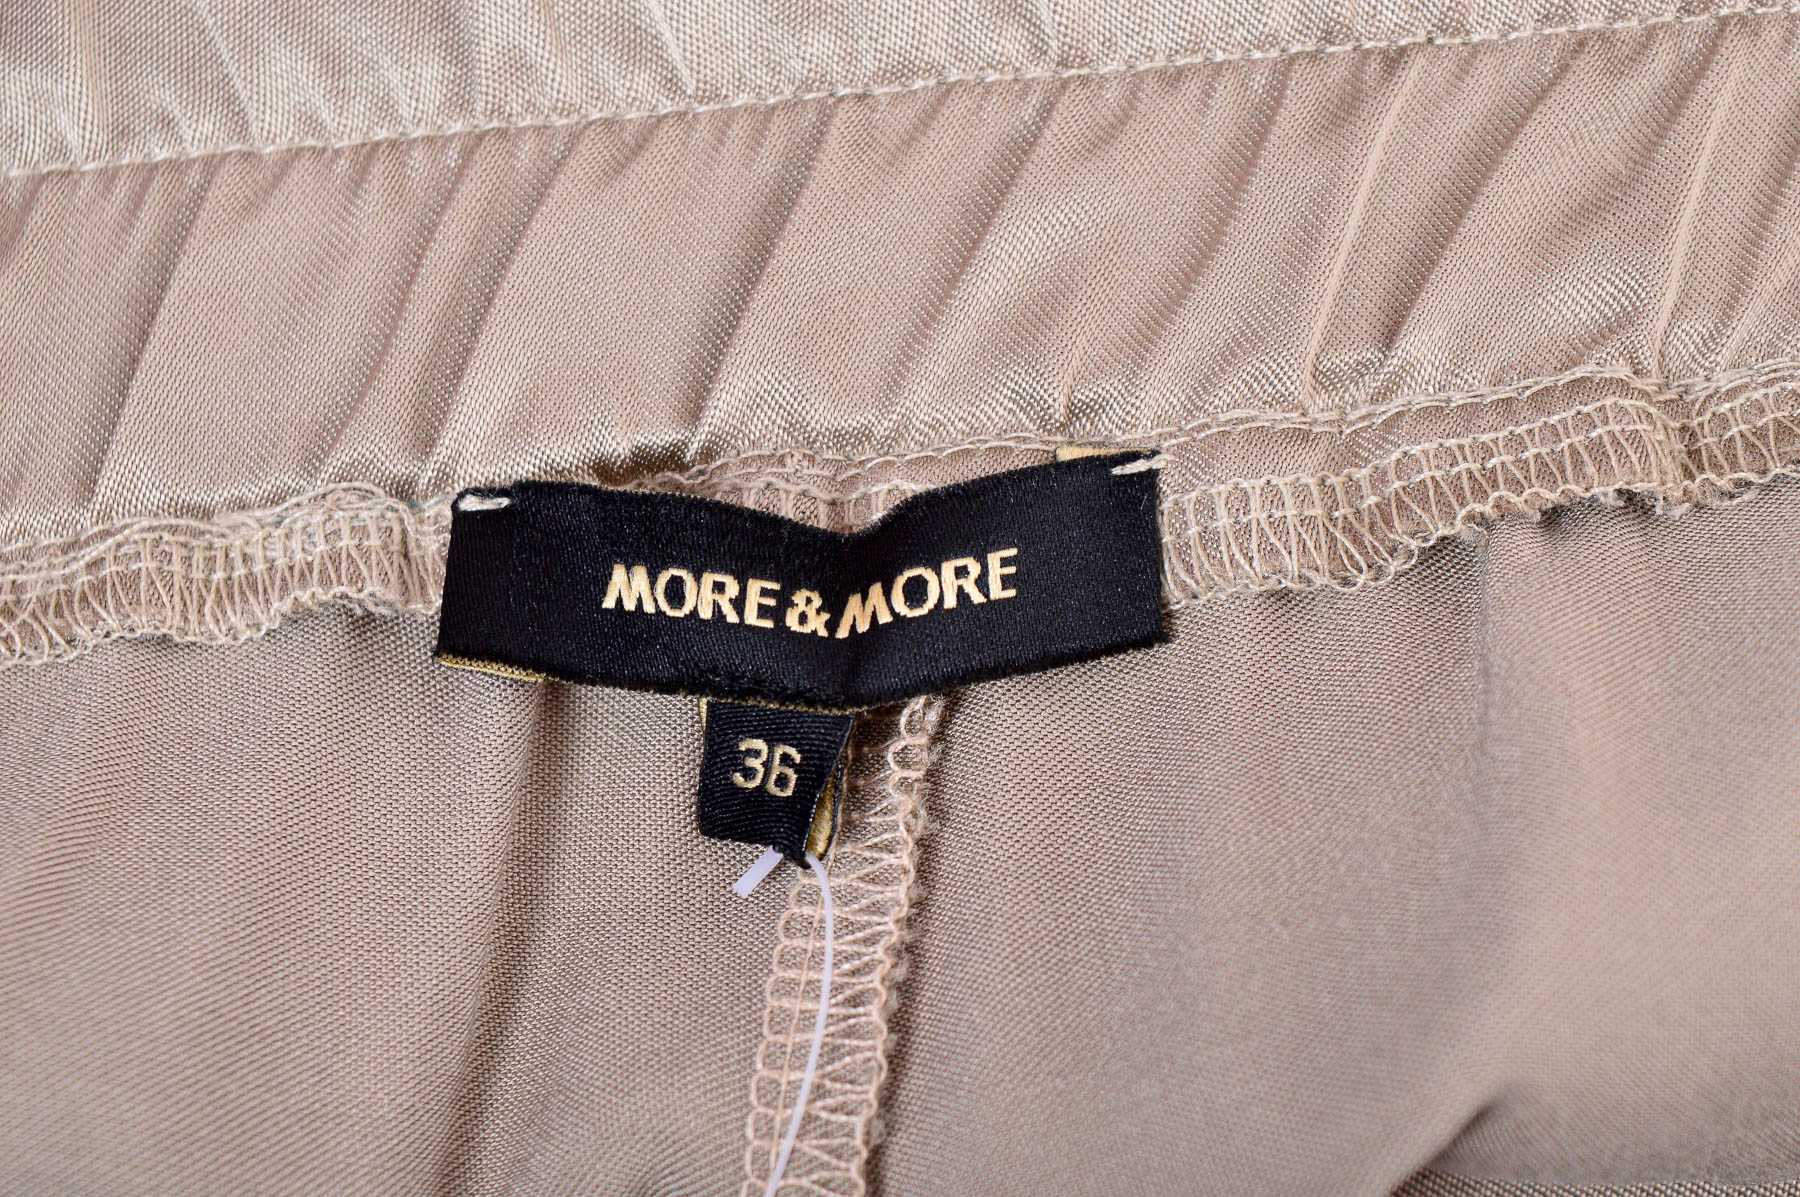 Women's trousers - More & More - 2